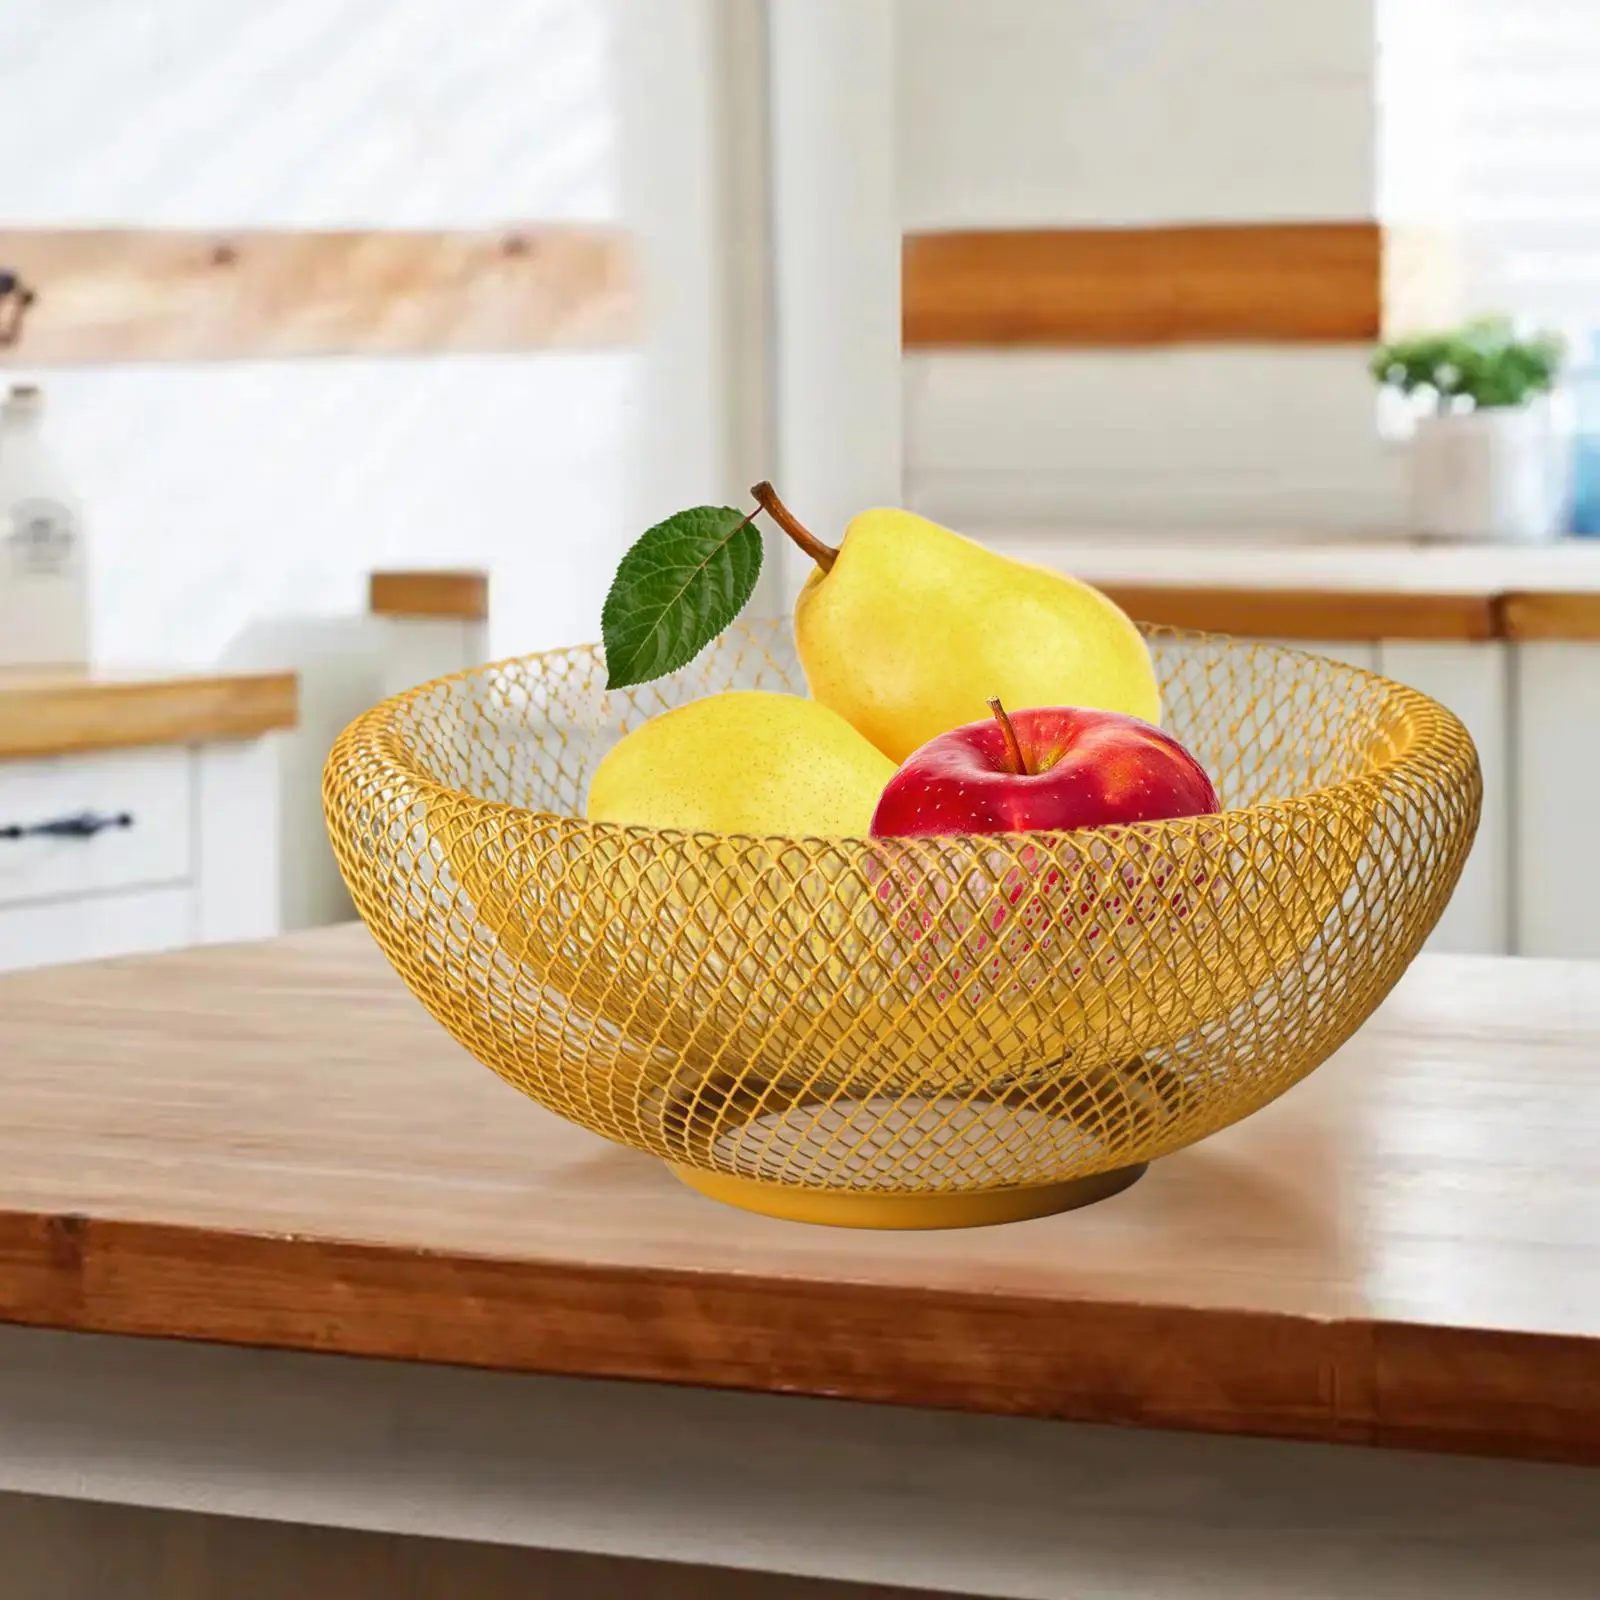 Nordic Wire Iron Fruit Basket Serving Tray Candy Storage Vegetable Stand Holder for Kitchen Restaurant Countertop Home Decor